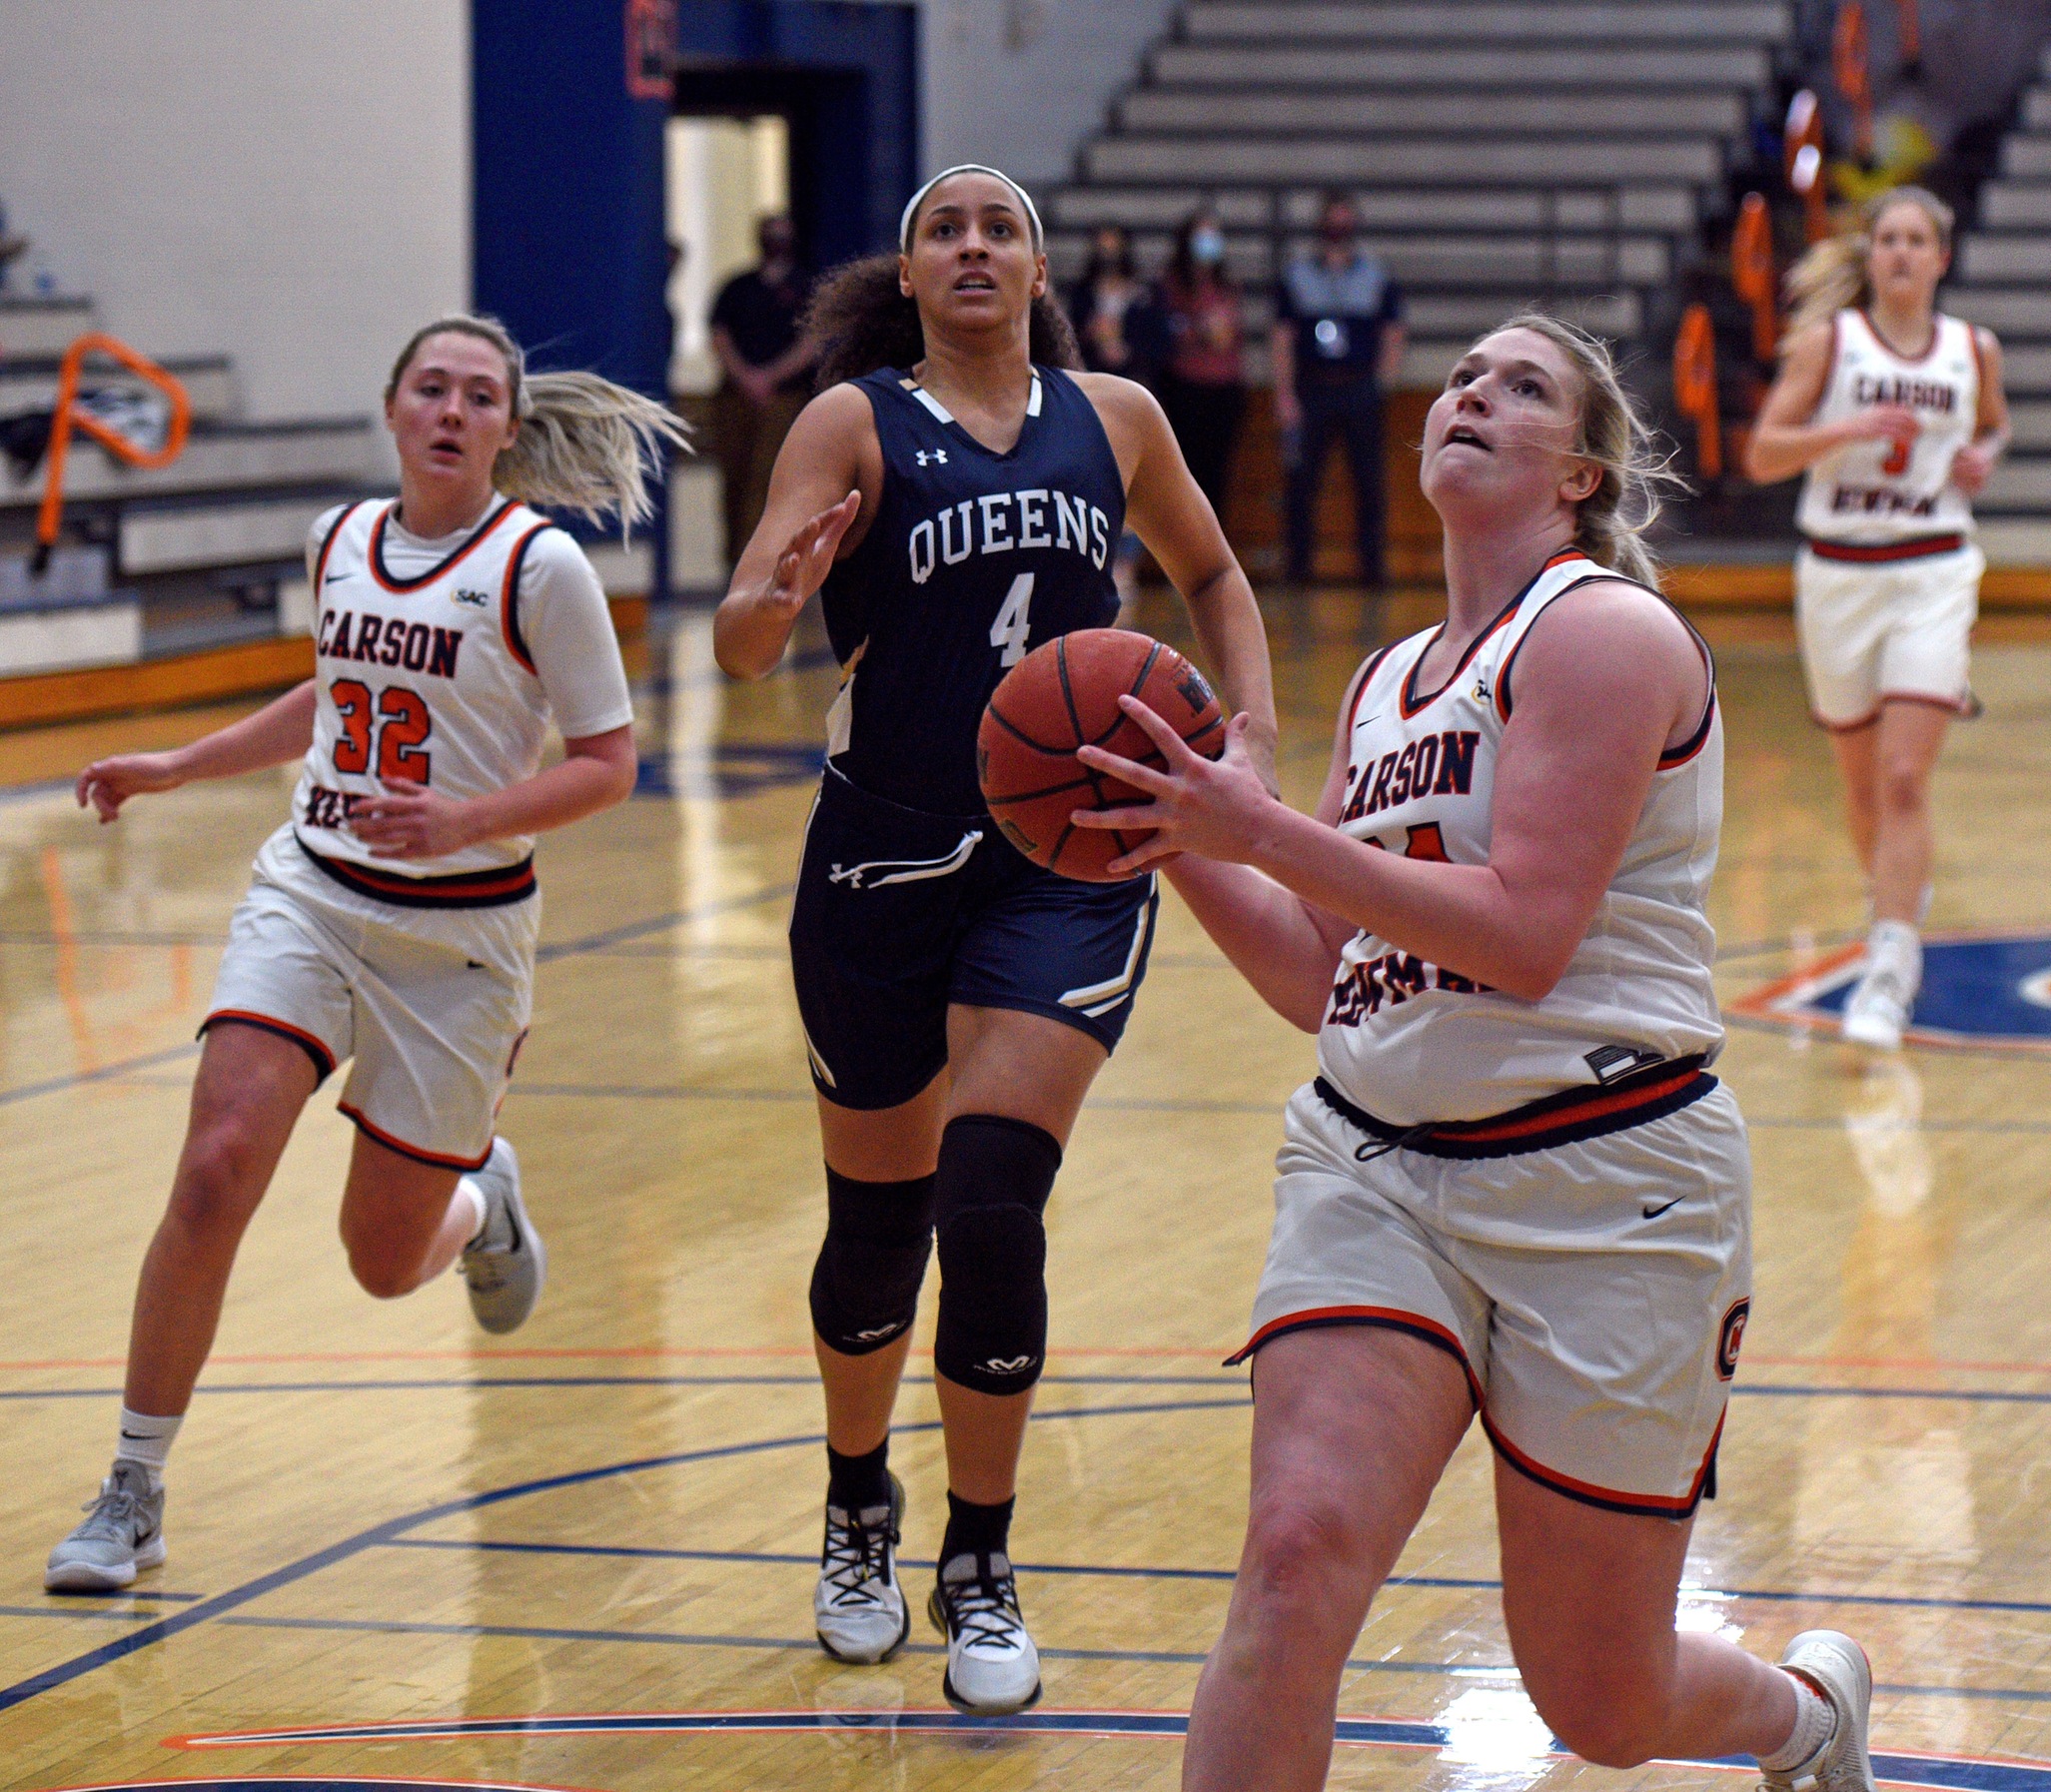 Opportunistic Lady Eagles survive scare at Wise